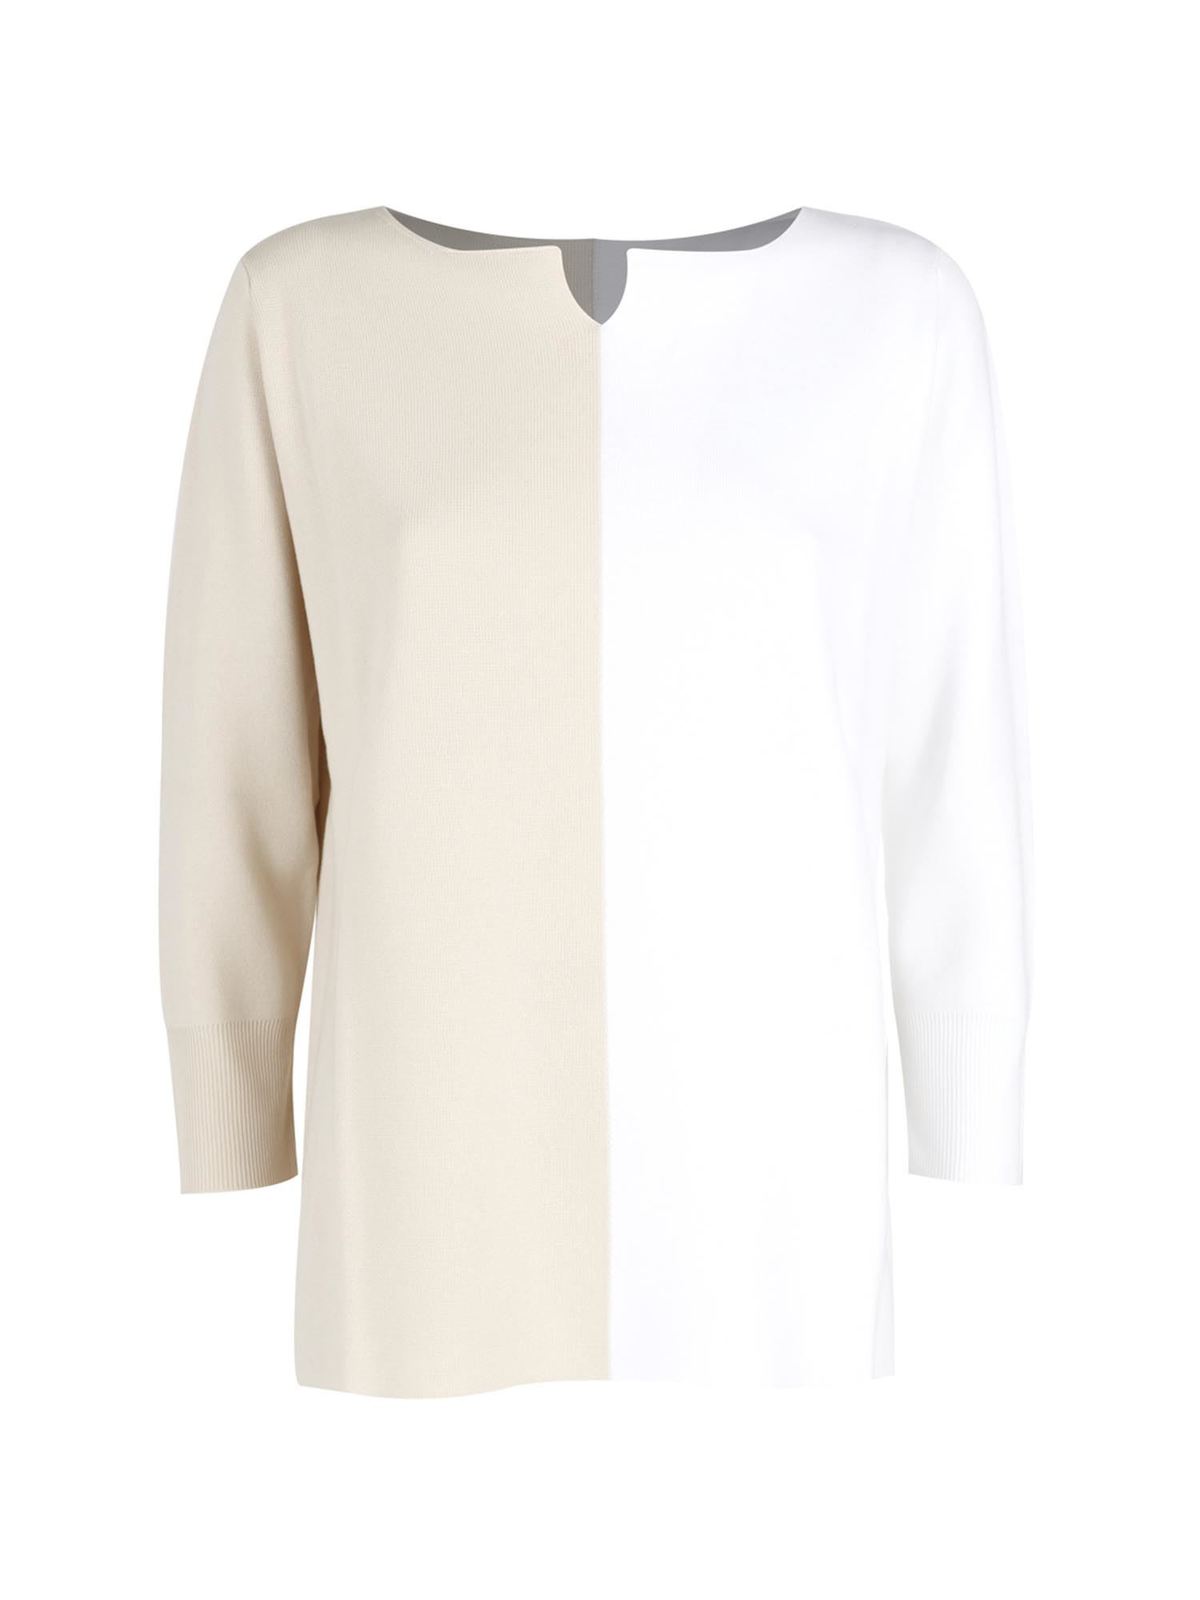 LE TRICOT PERUGIA COLOR BLOCK SWEATER IN WHITE AND BEIGE